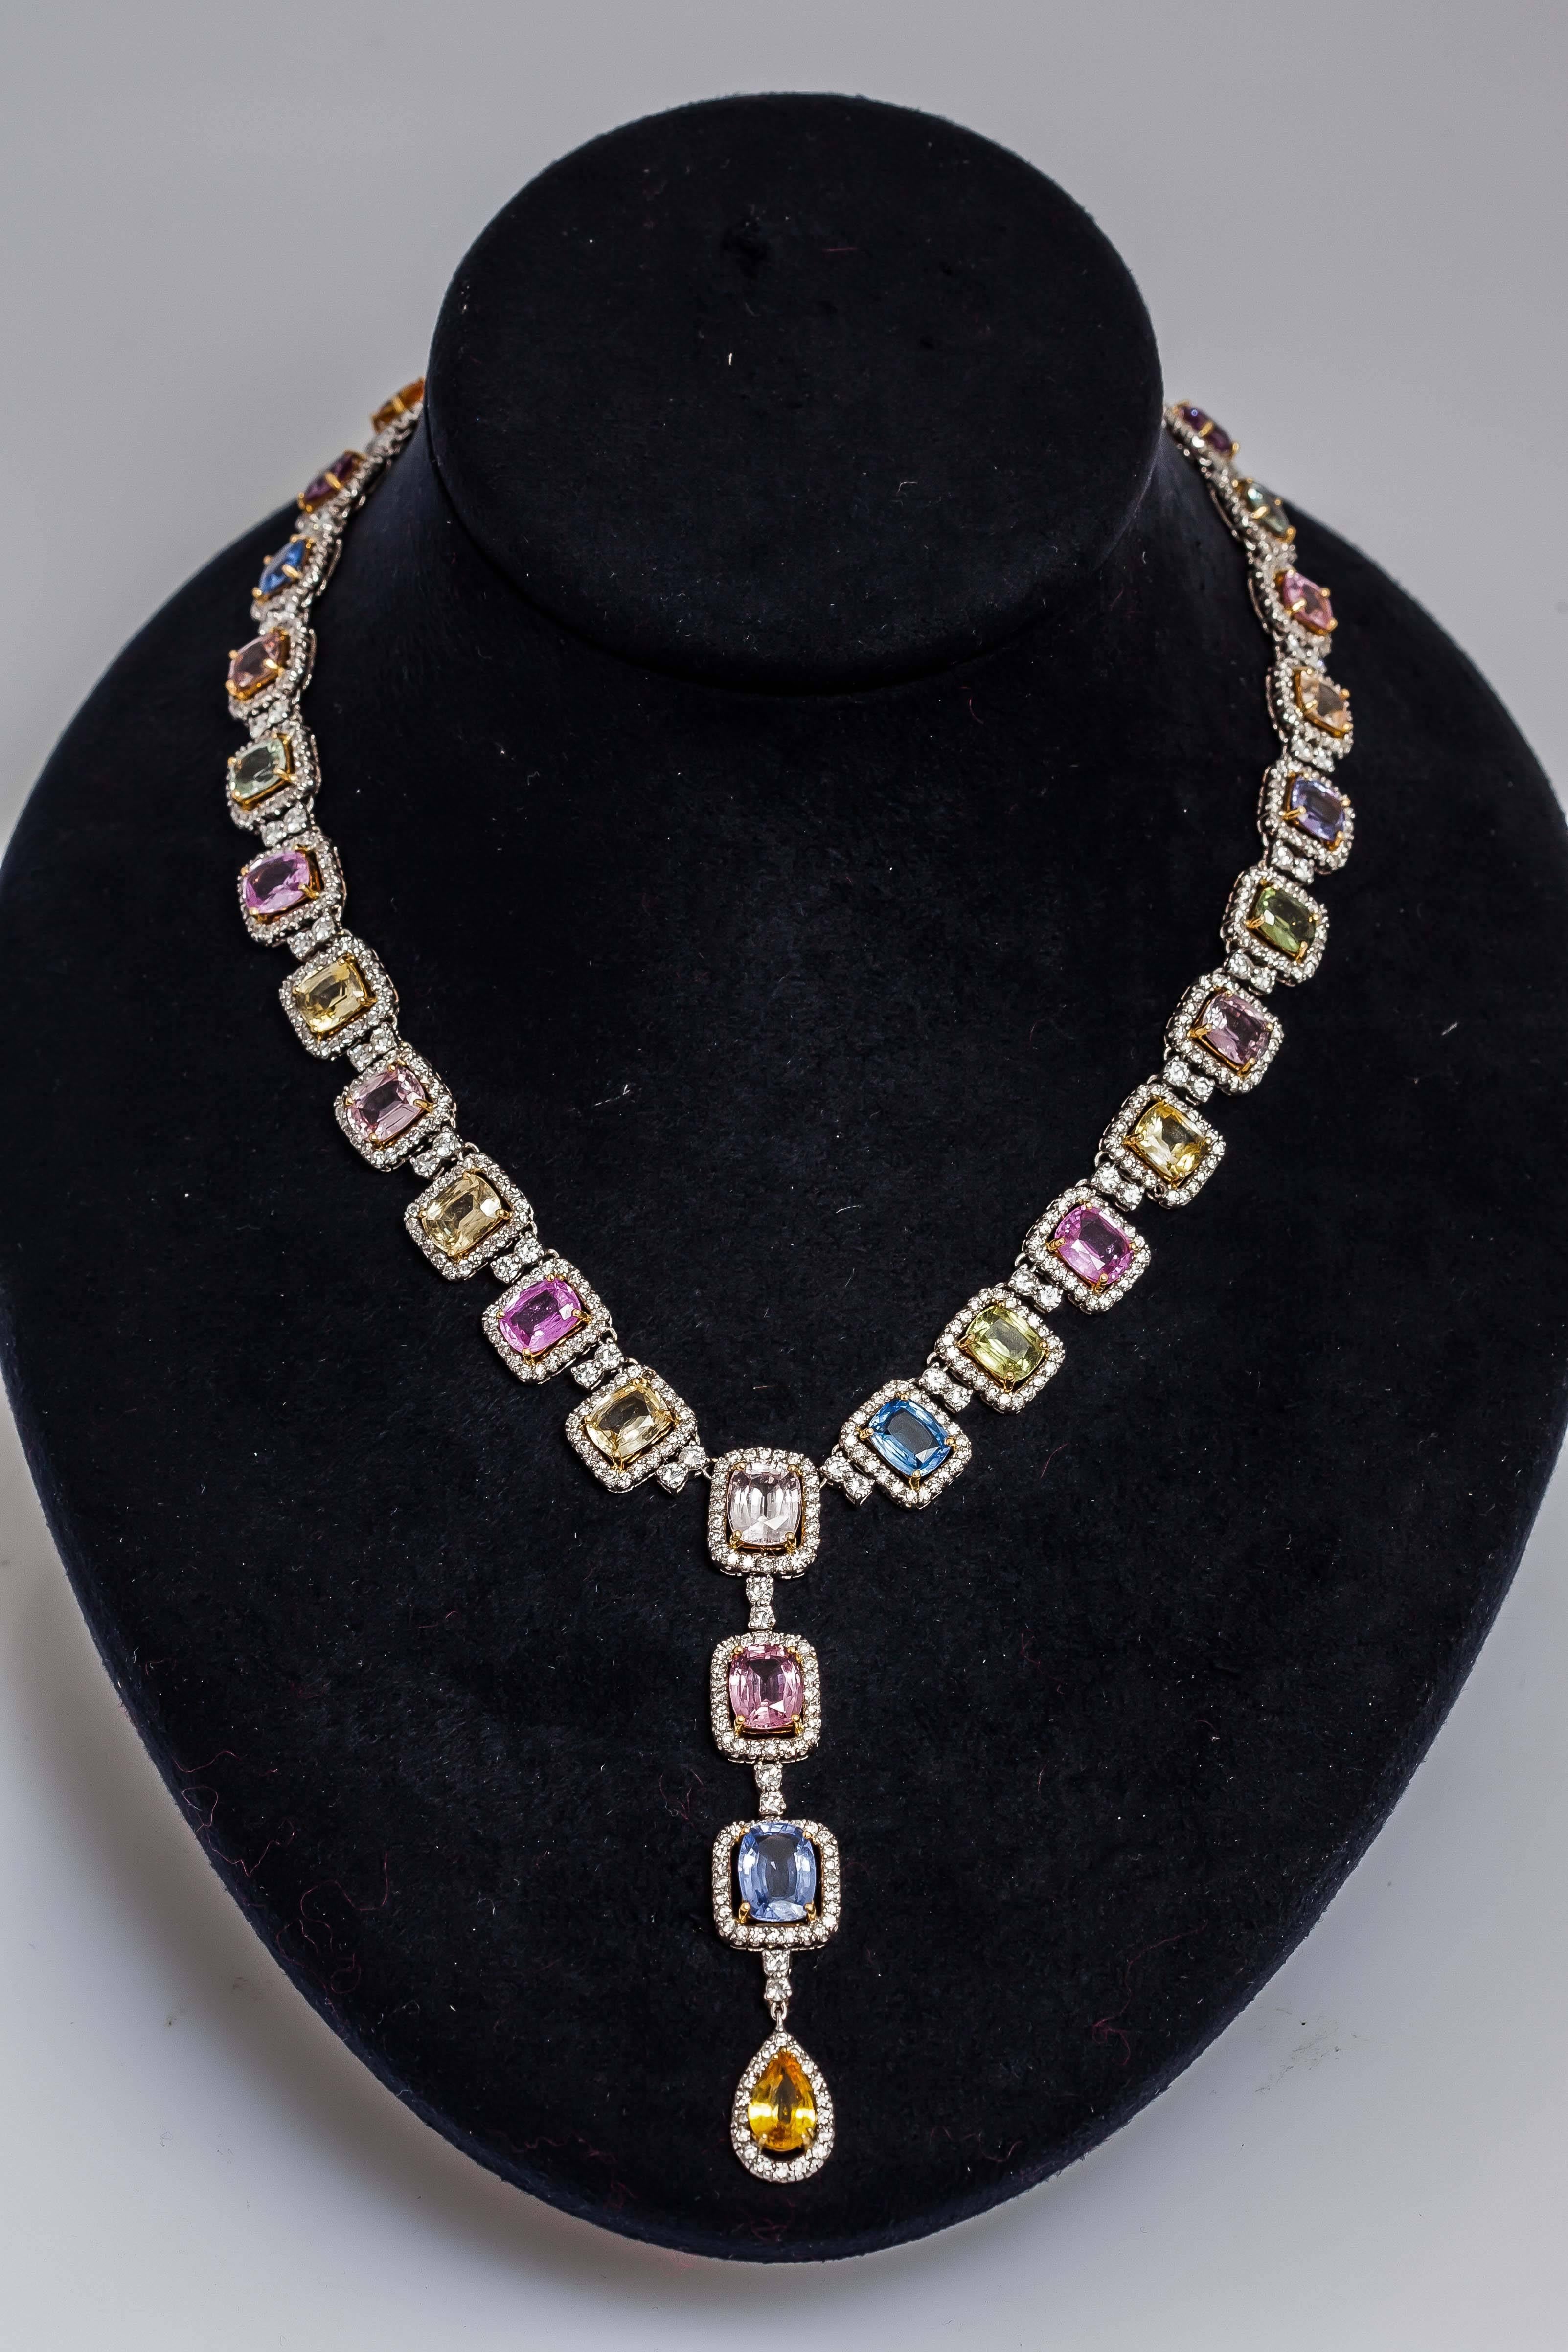 Beautiful multi-color sapphire necklace finely crafted in 18k white gold, with pink, light and dark yellow, blue, green sapphires weighing approx. 55.24 carats and round brilliant cut diamonds weighing approx.13.22 carats.